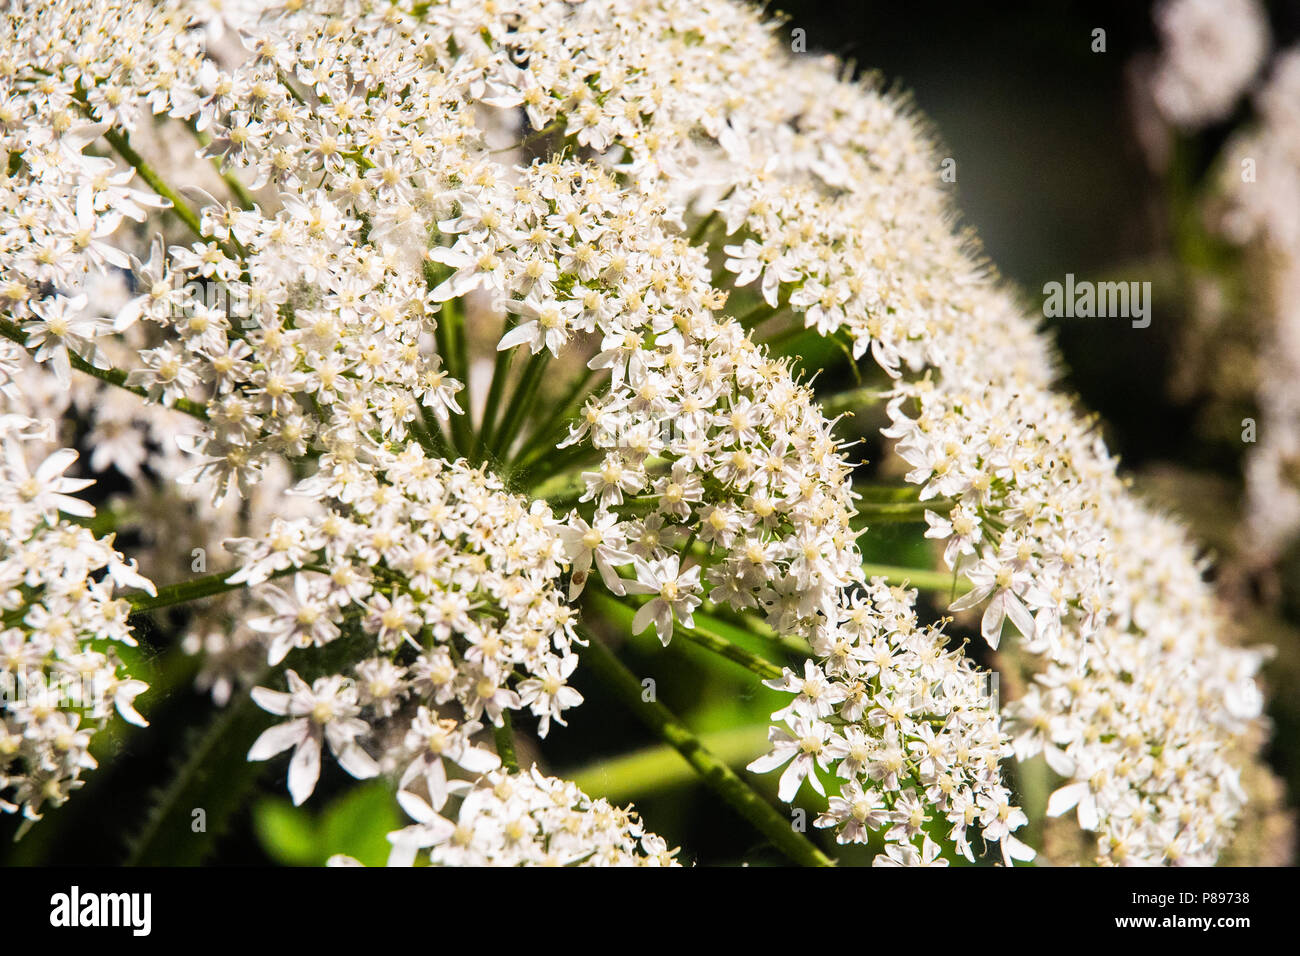 Flowers of the cow parsnip plant. Stock Photo